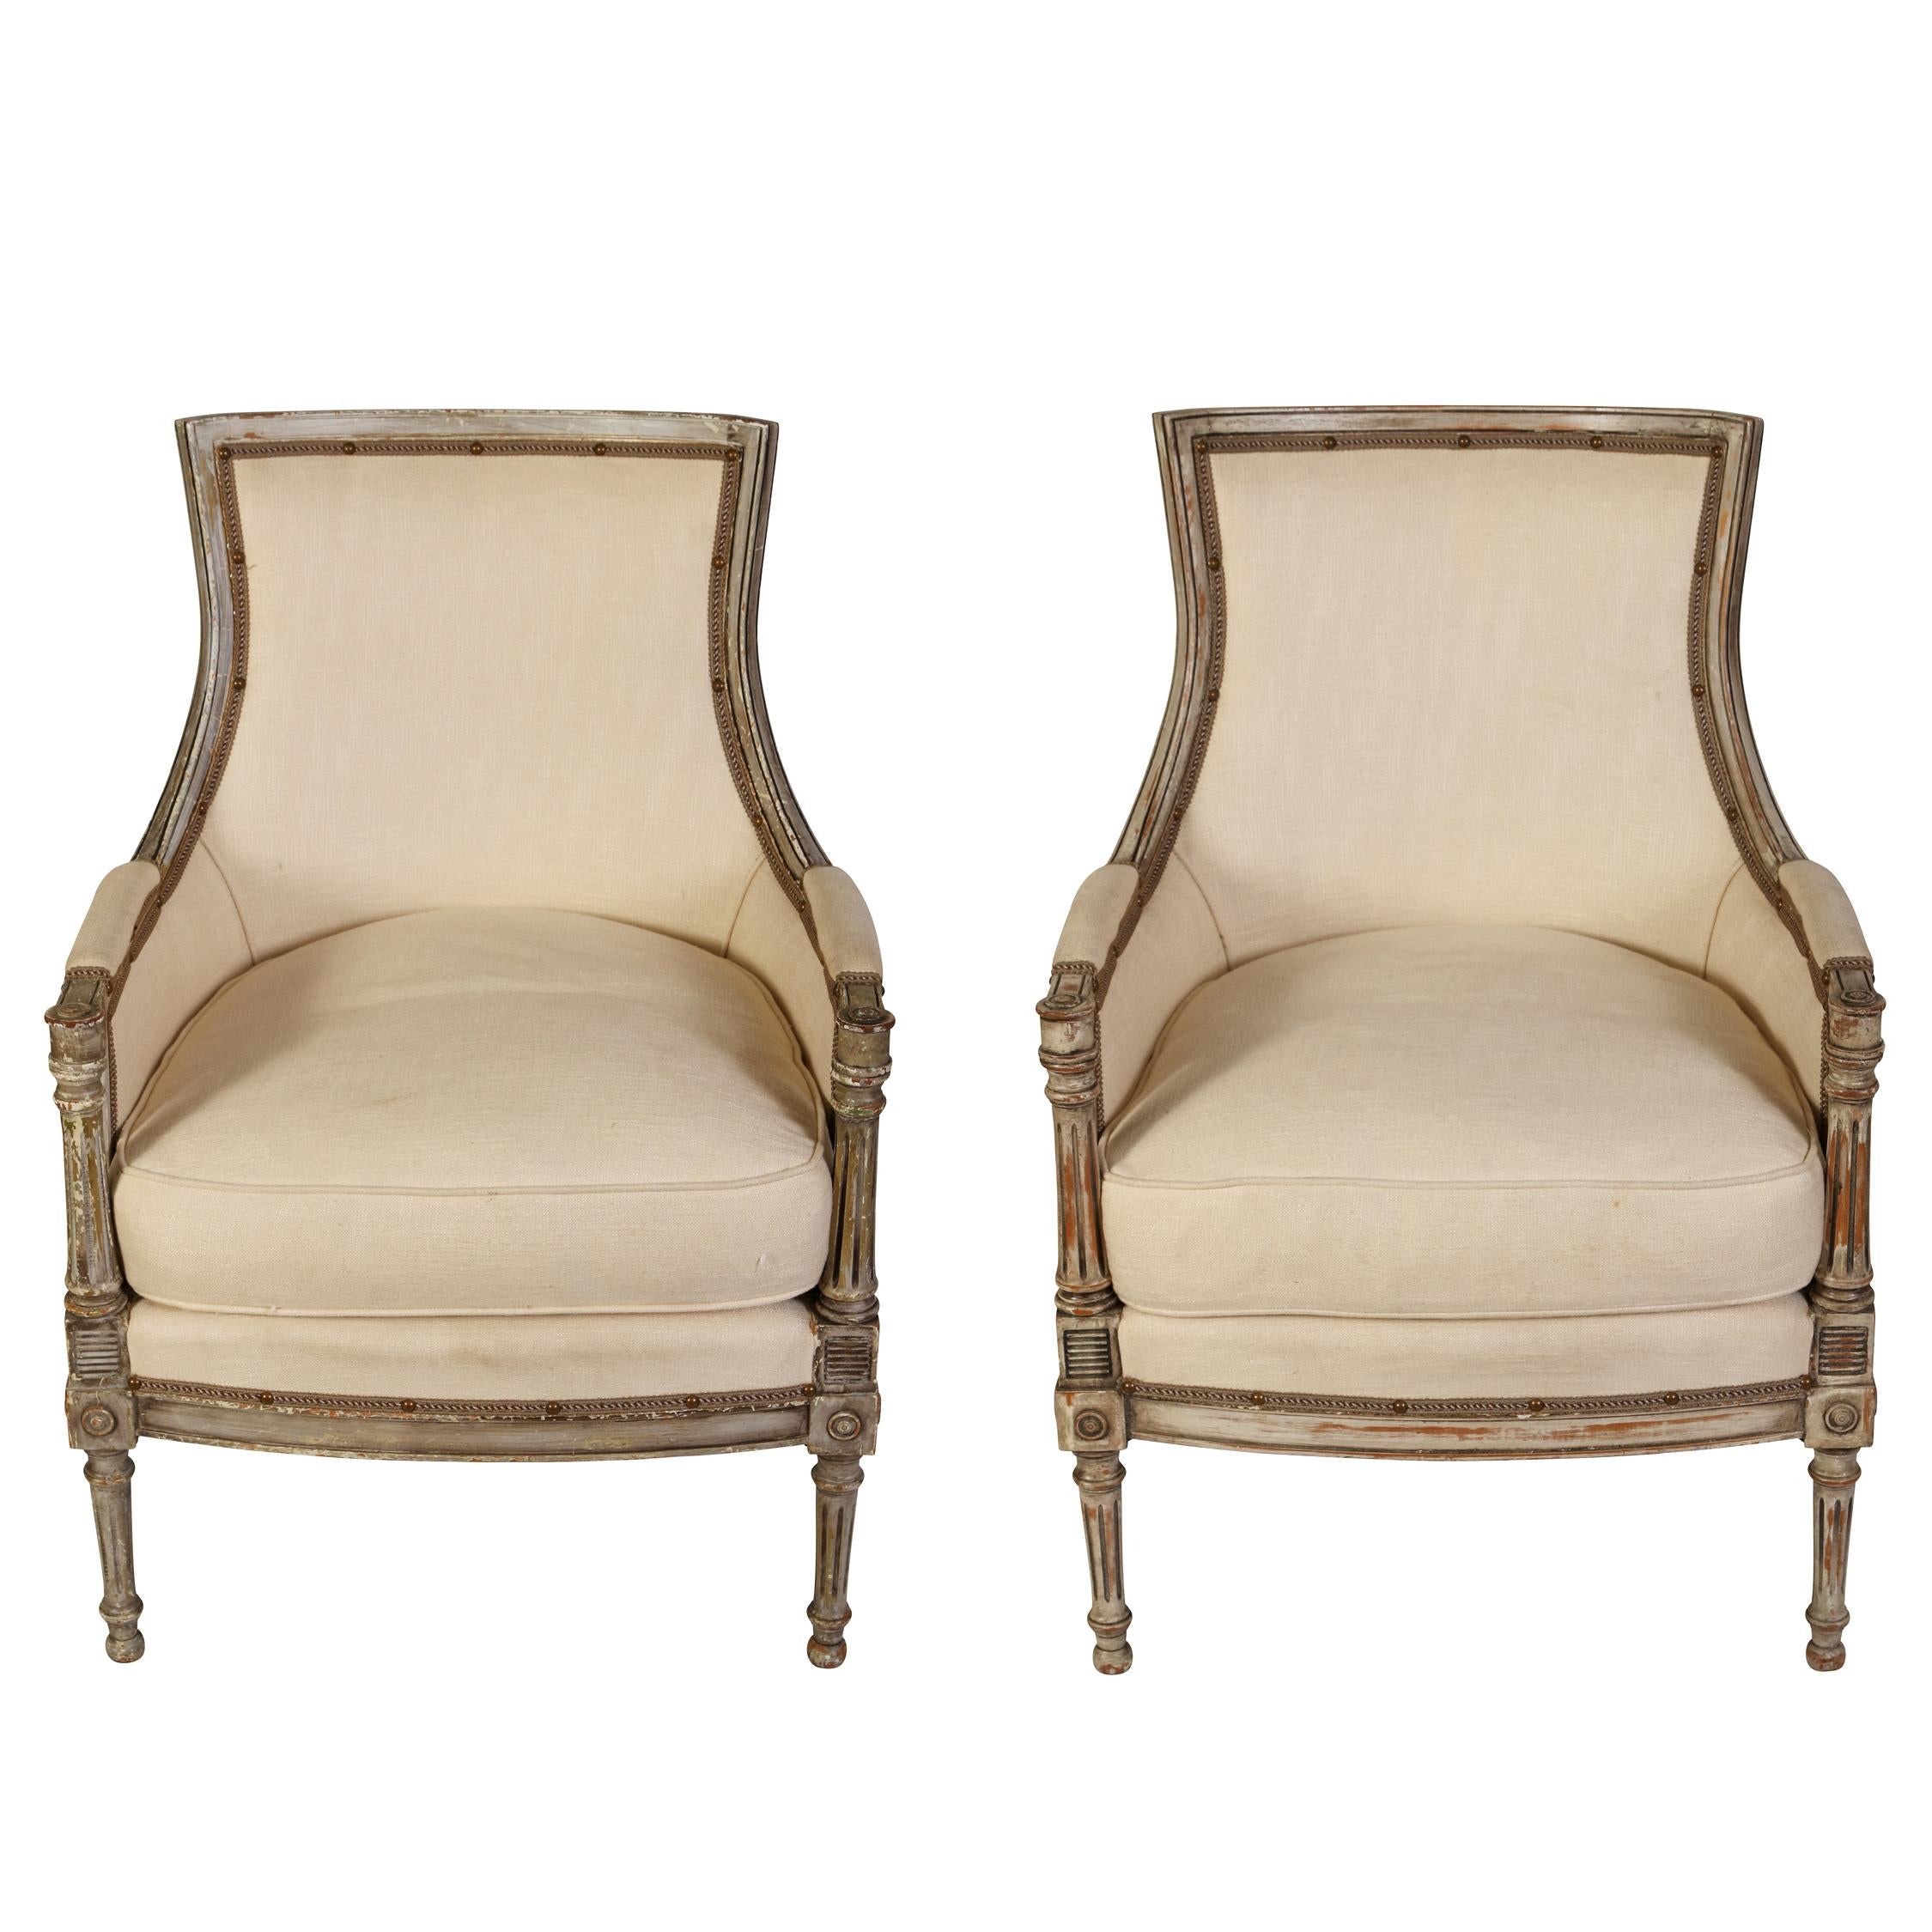 A pair of elegant Louis XVI style bergères with a squared back and a loose seat cushion.  The graceful chairs have many of the lovely details characteristic of the Louis XVI style, including subtle carving, fluted arm supports, tapered fluted legs,